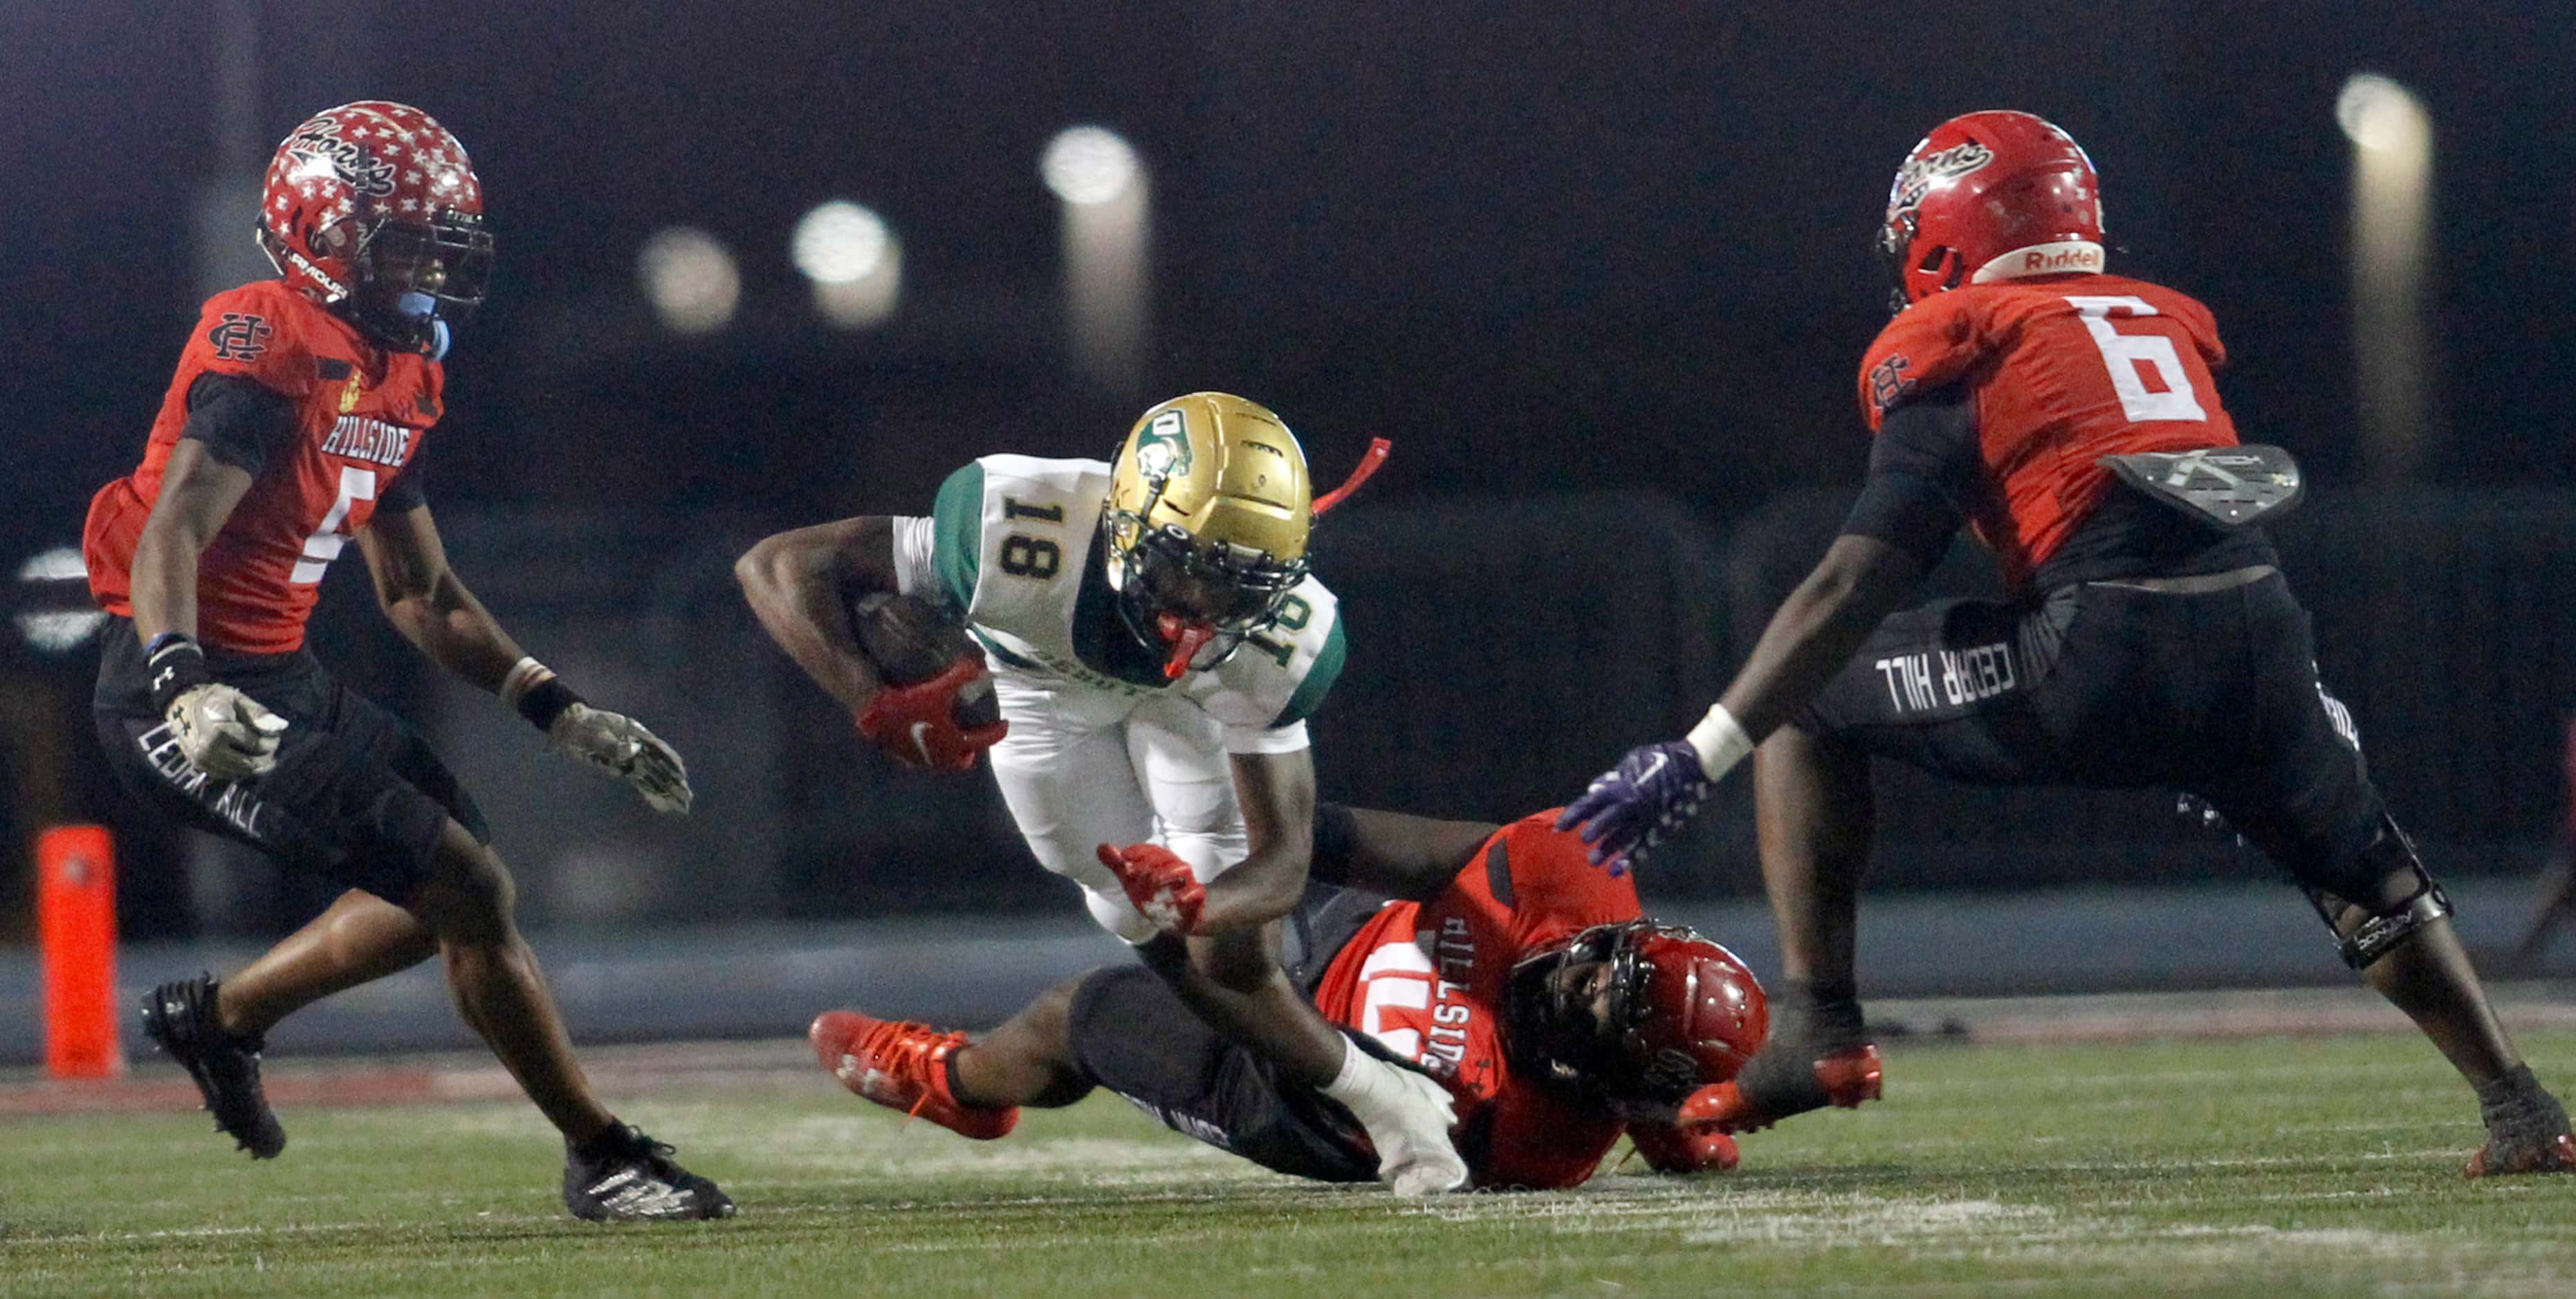 DeSoto receiver Ethan Feaster (18) is tackled by Cedar Hill linebacker Semaj Hervey (14), as...